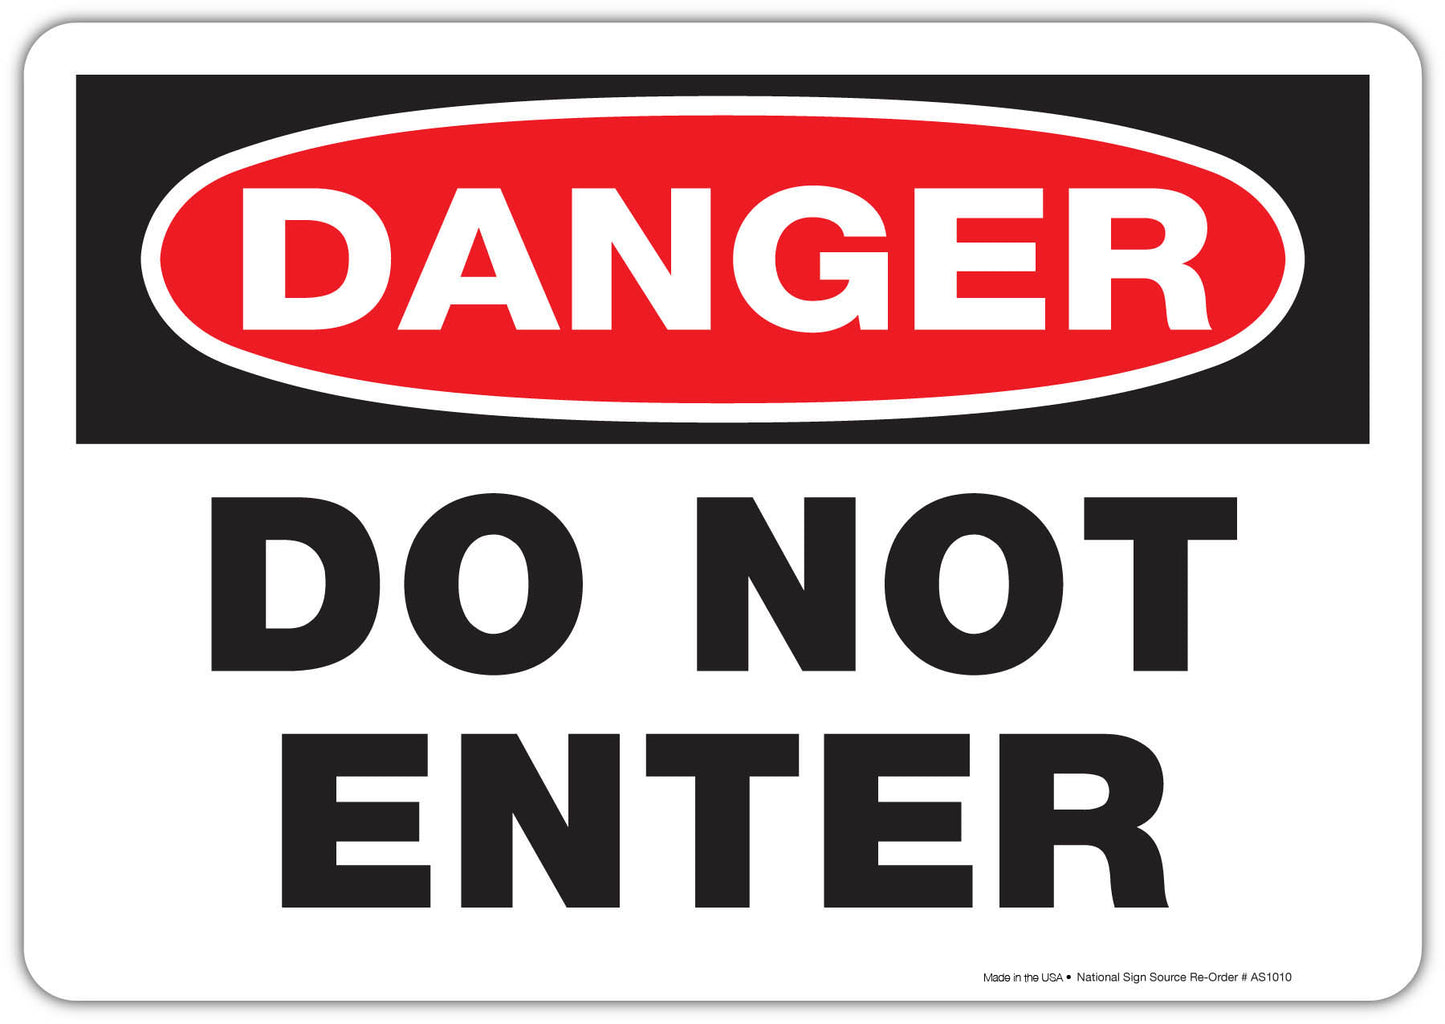 Danger Do Not Enter sign made from adhesive backed vinyl decal sticker material or aluminum sign